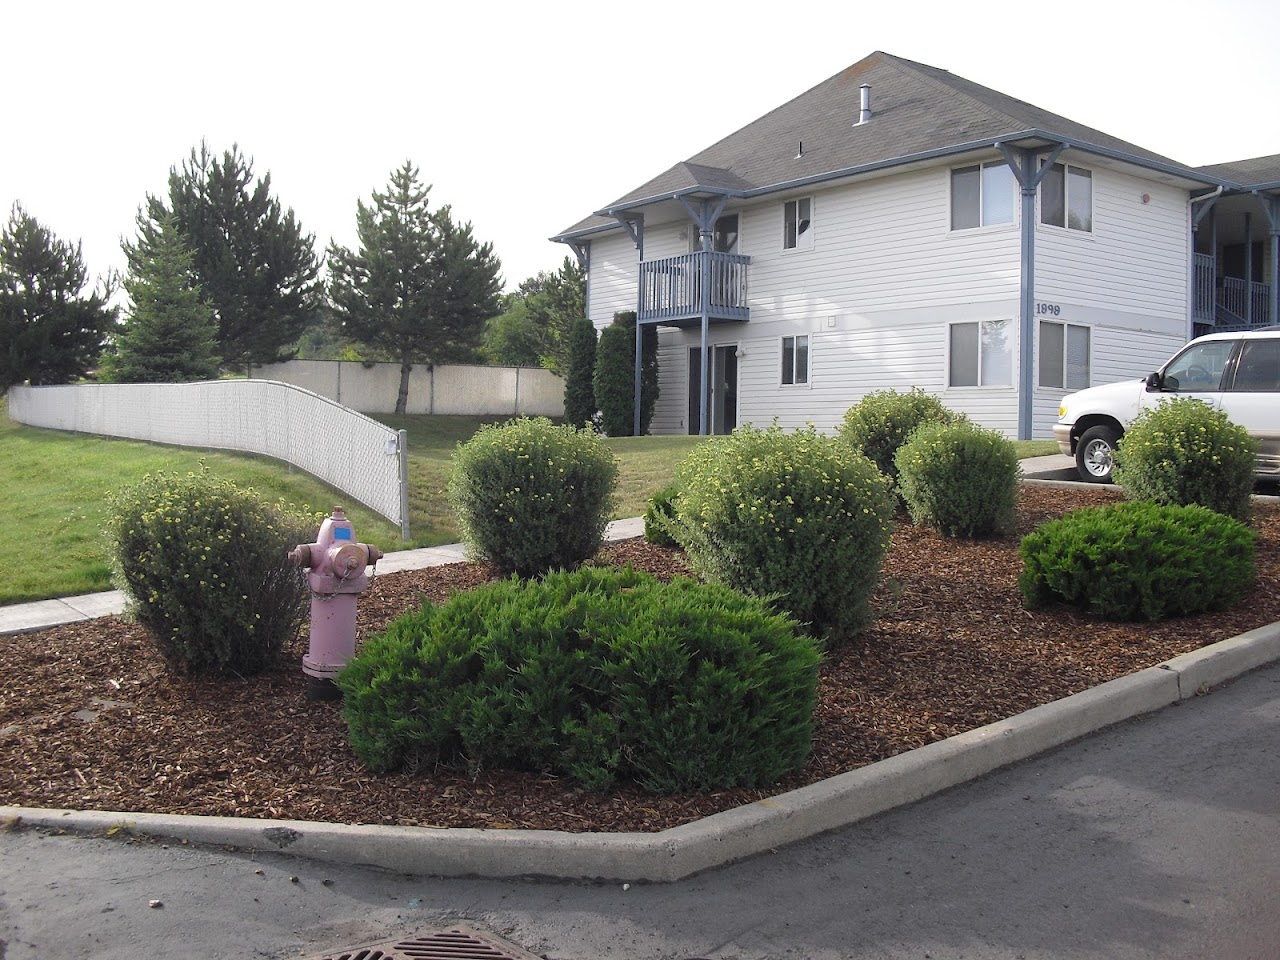 Photo of CAMAS VILLAGE. Affordable housing located at 1875 WHITE AVENUE MOSCOW, ID 83843